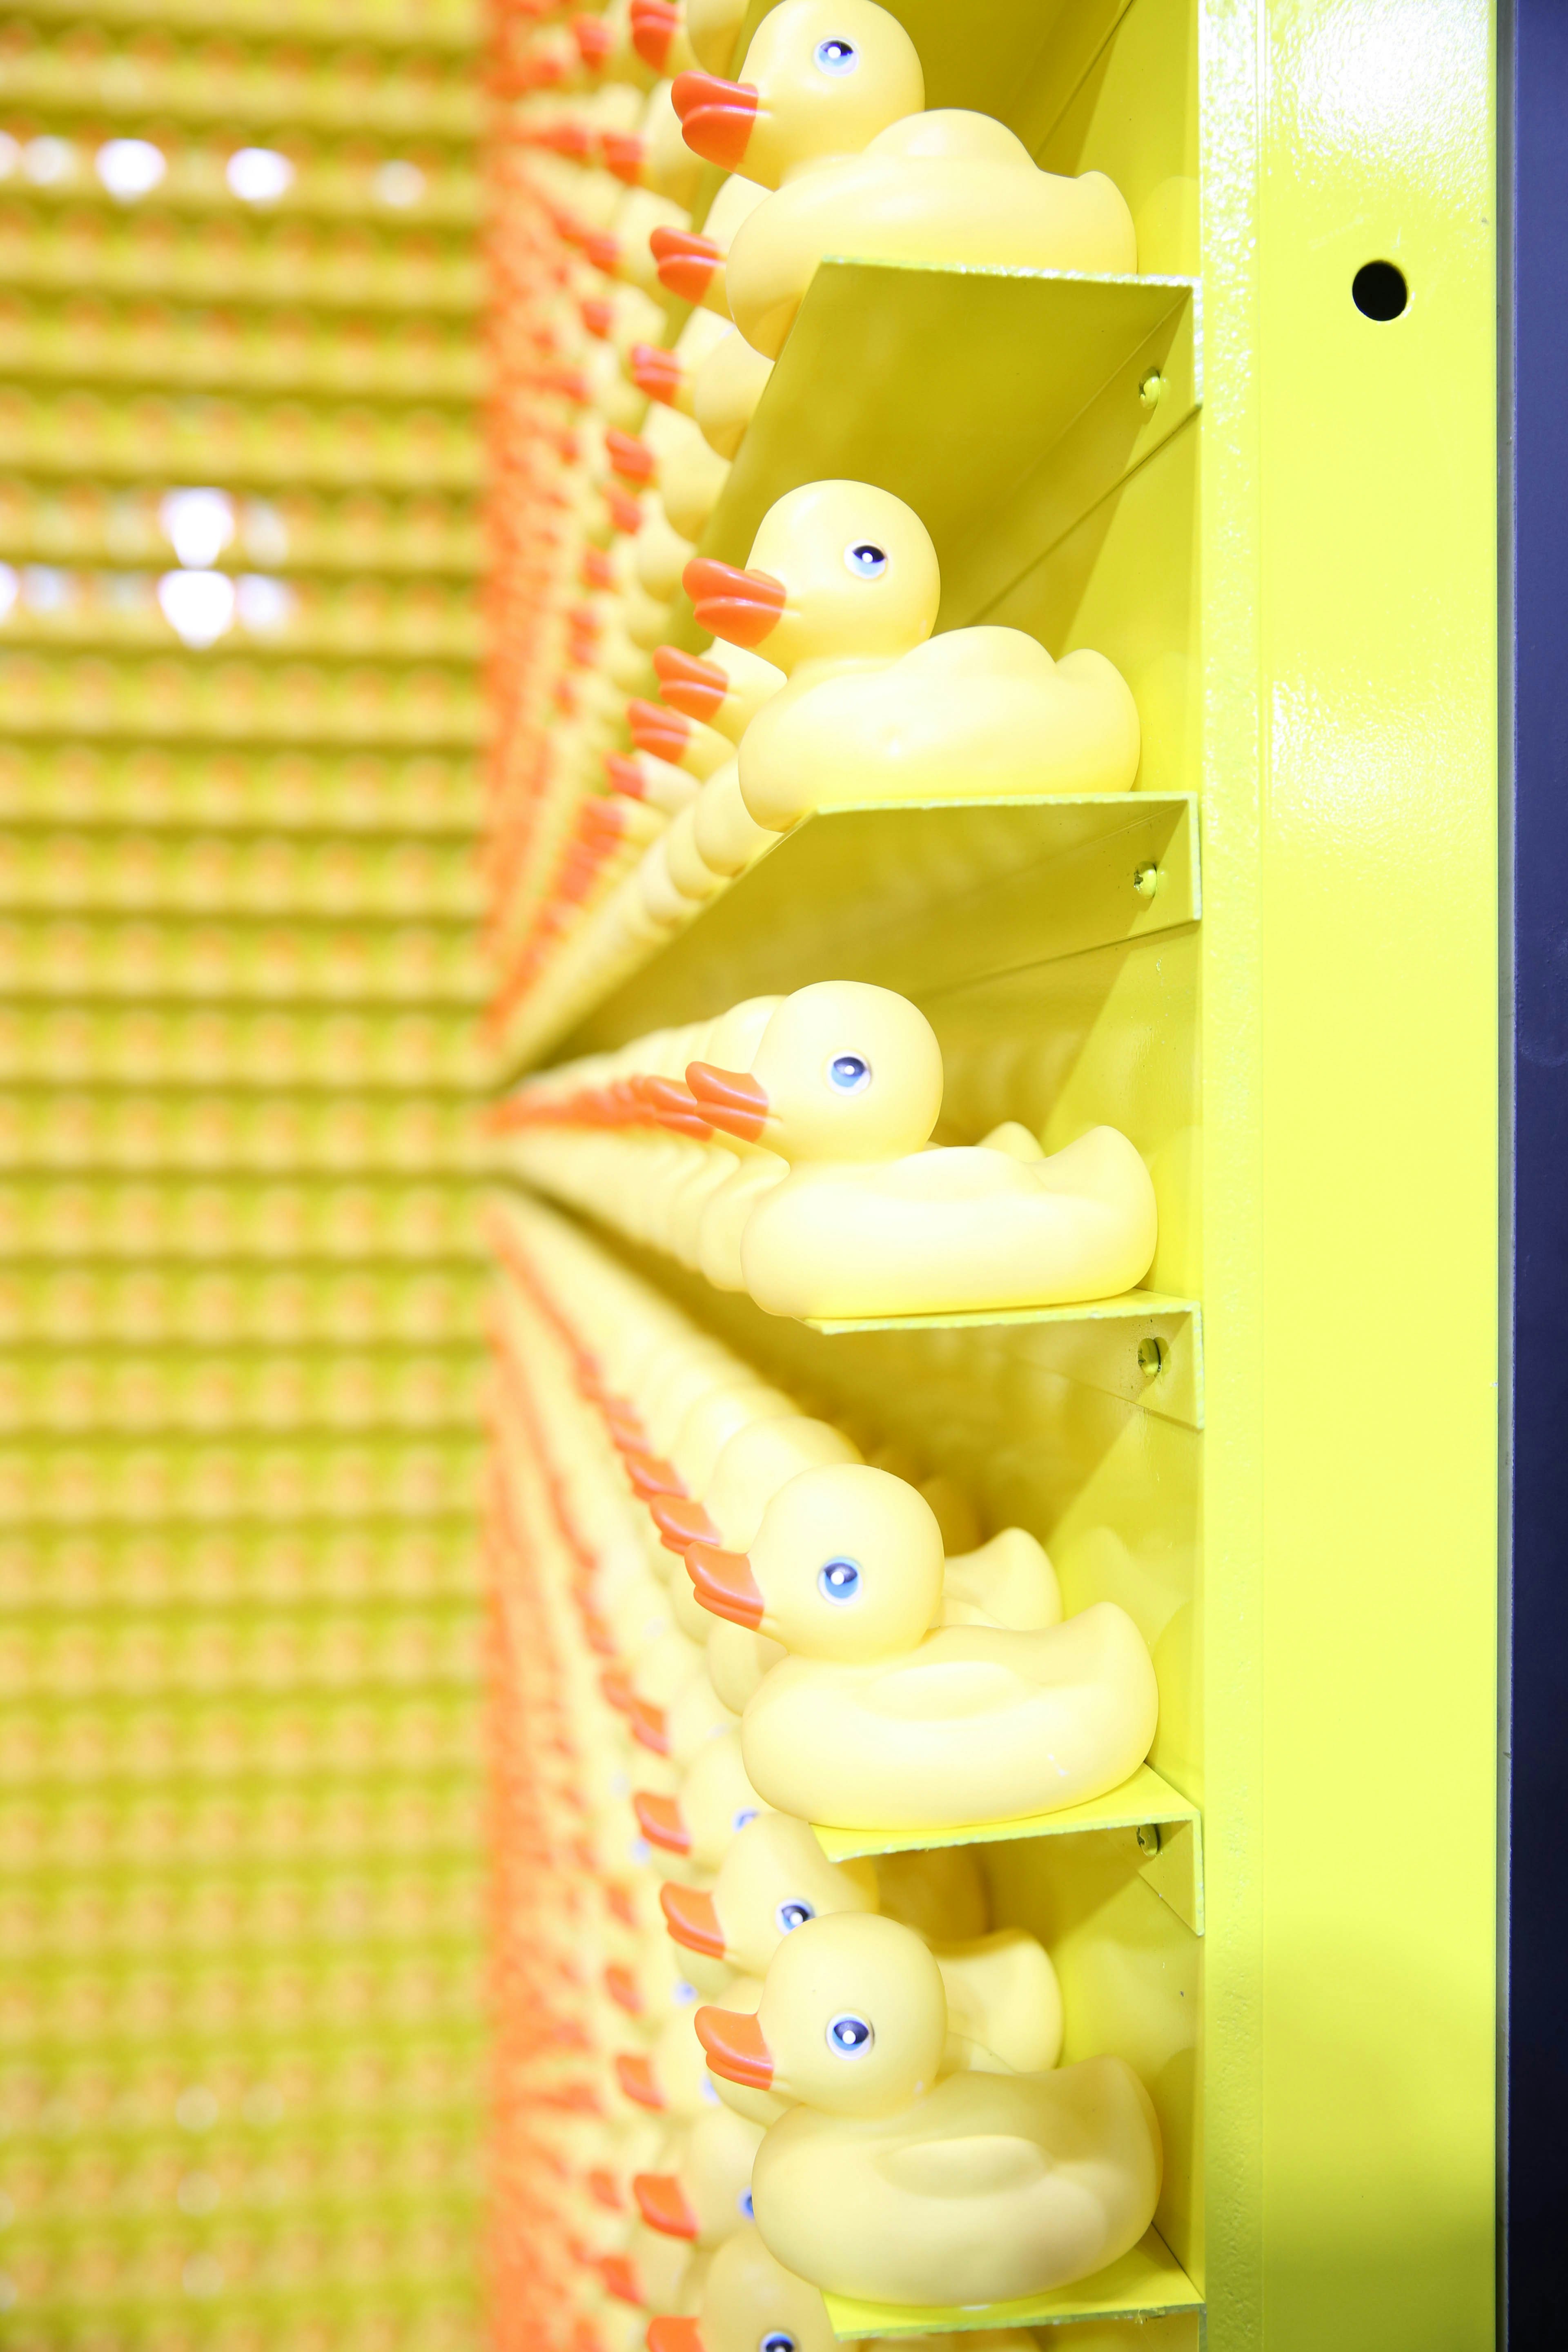 An installation featuring floor-to-ceiling shelves of yellow rubber ducks